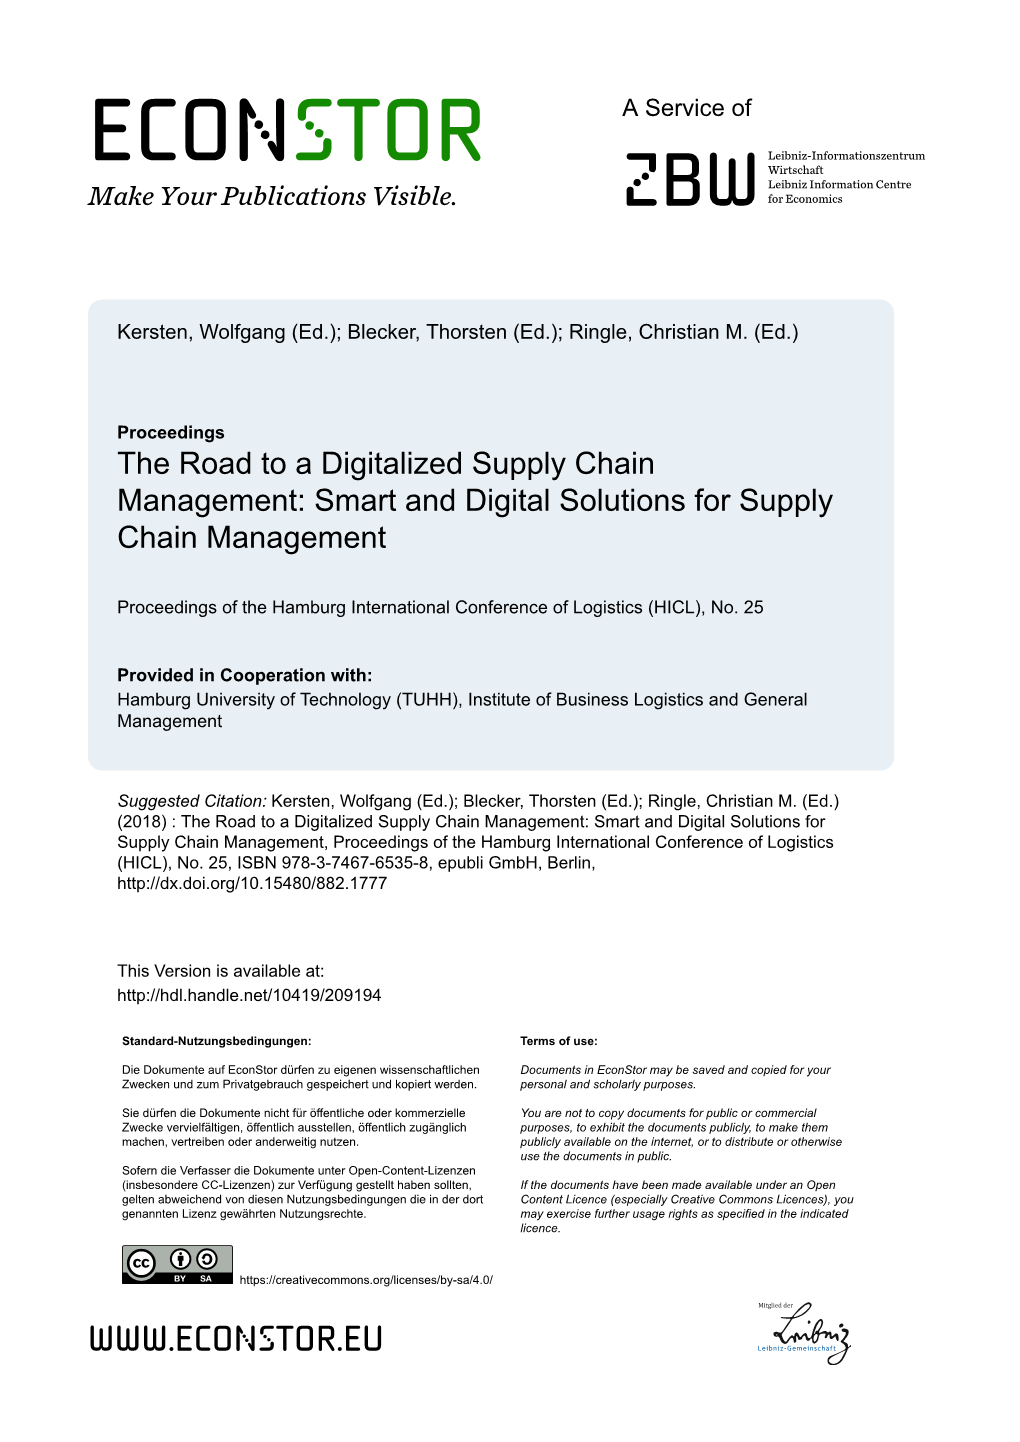 The Road to a Digitalized Supply Chain Management: Smart and Digital Solutions for Supply Chain Management